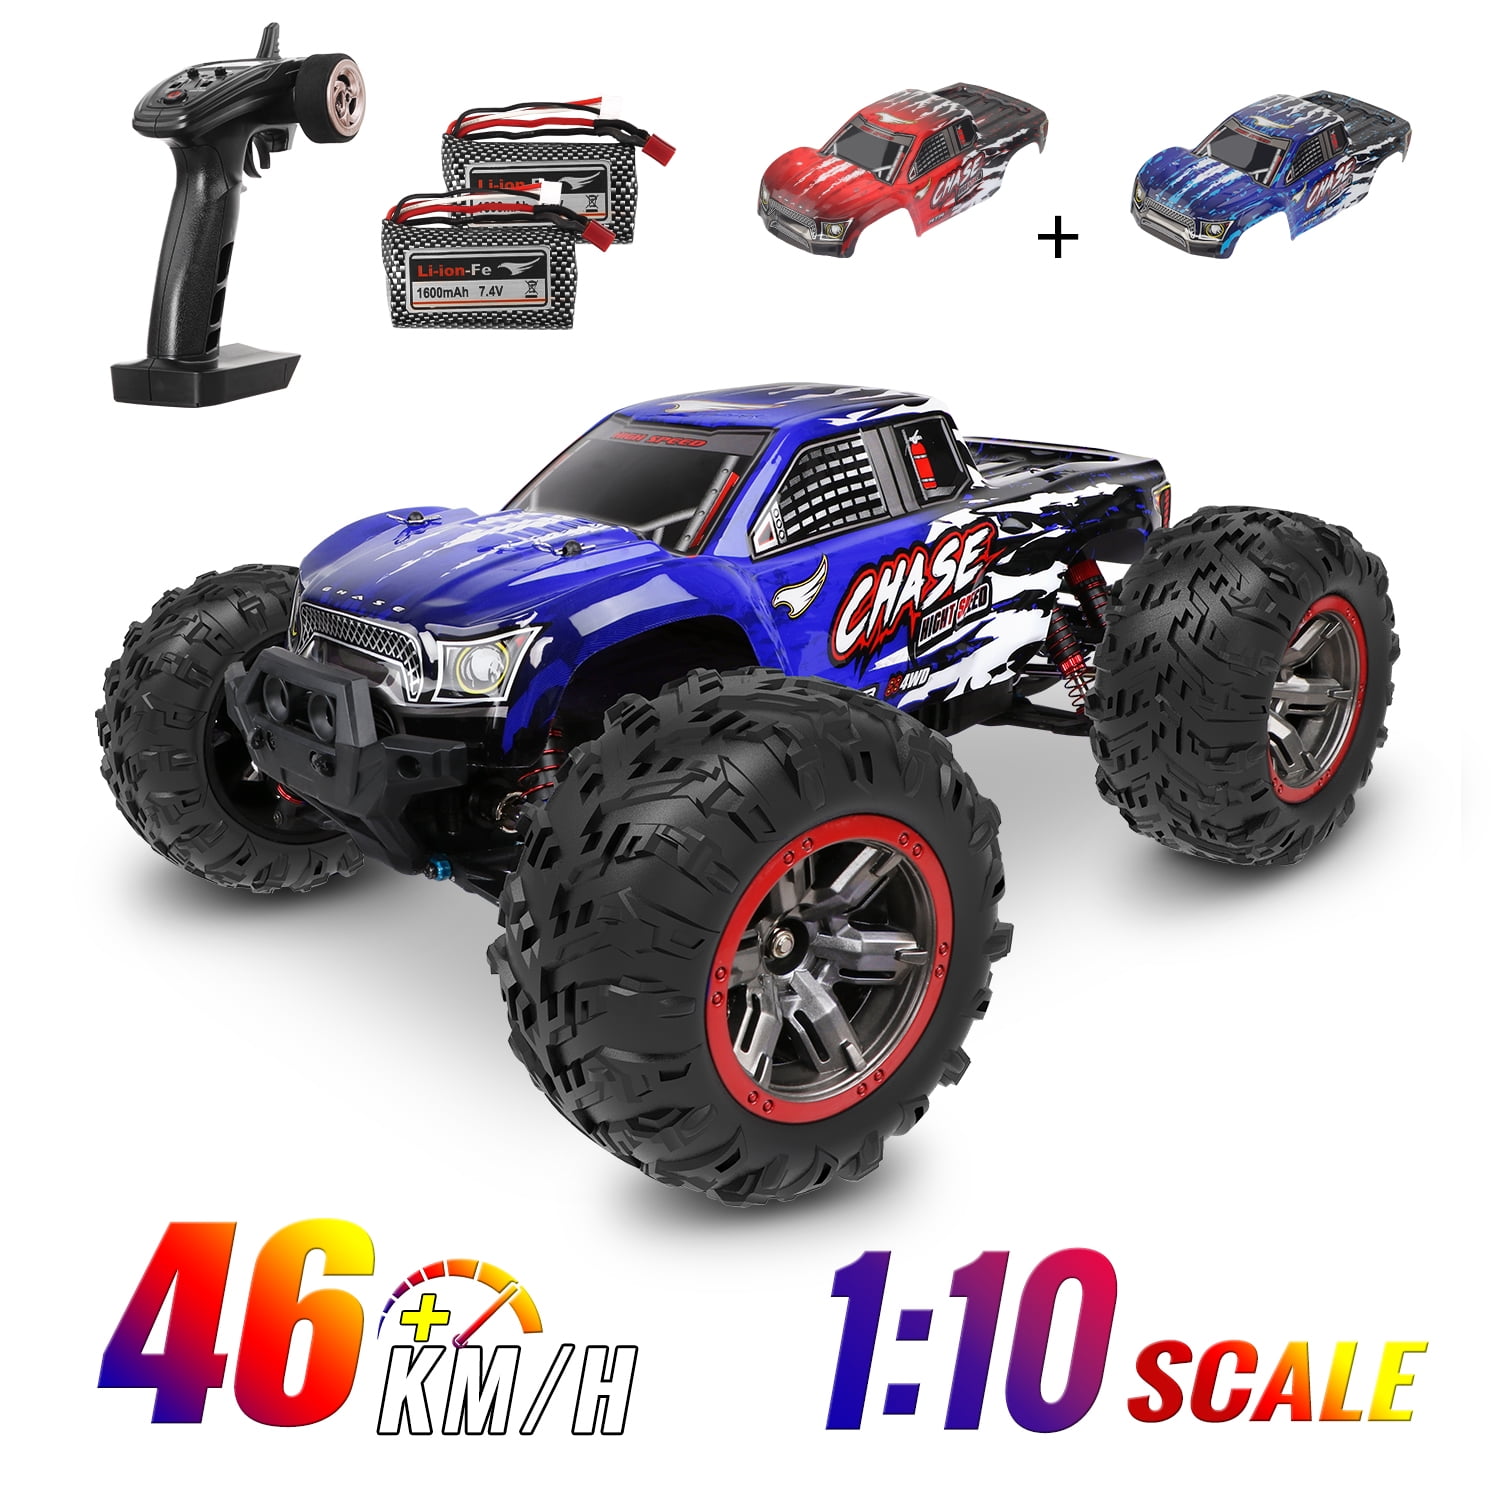 Large Size 1:10 Scale High Speed 46km/h 4WD 2.4Ghz Remote Control Truck Lot 